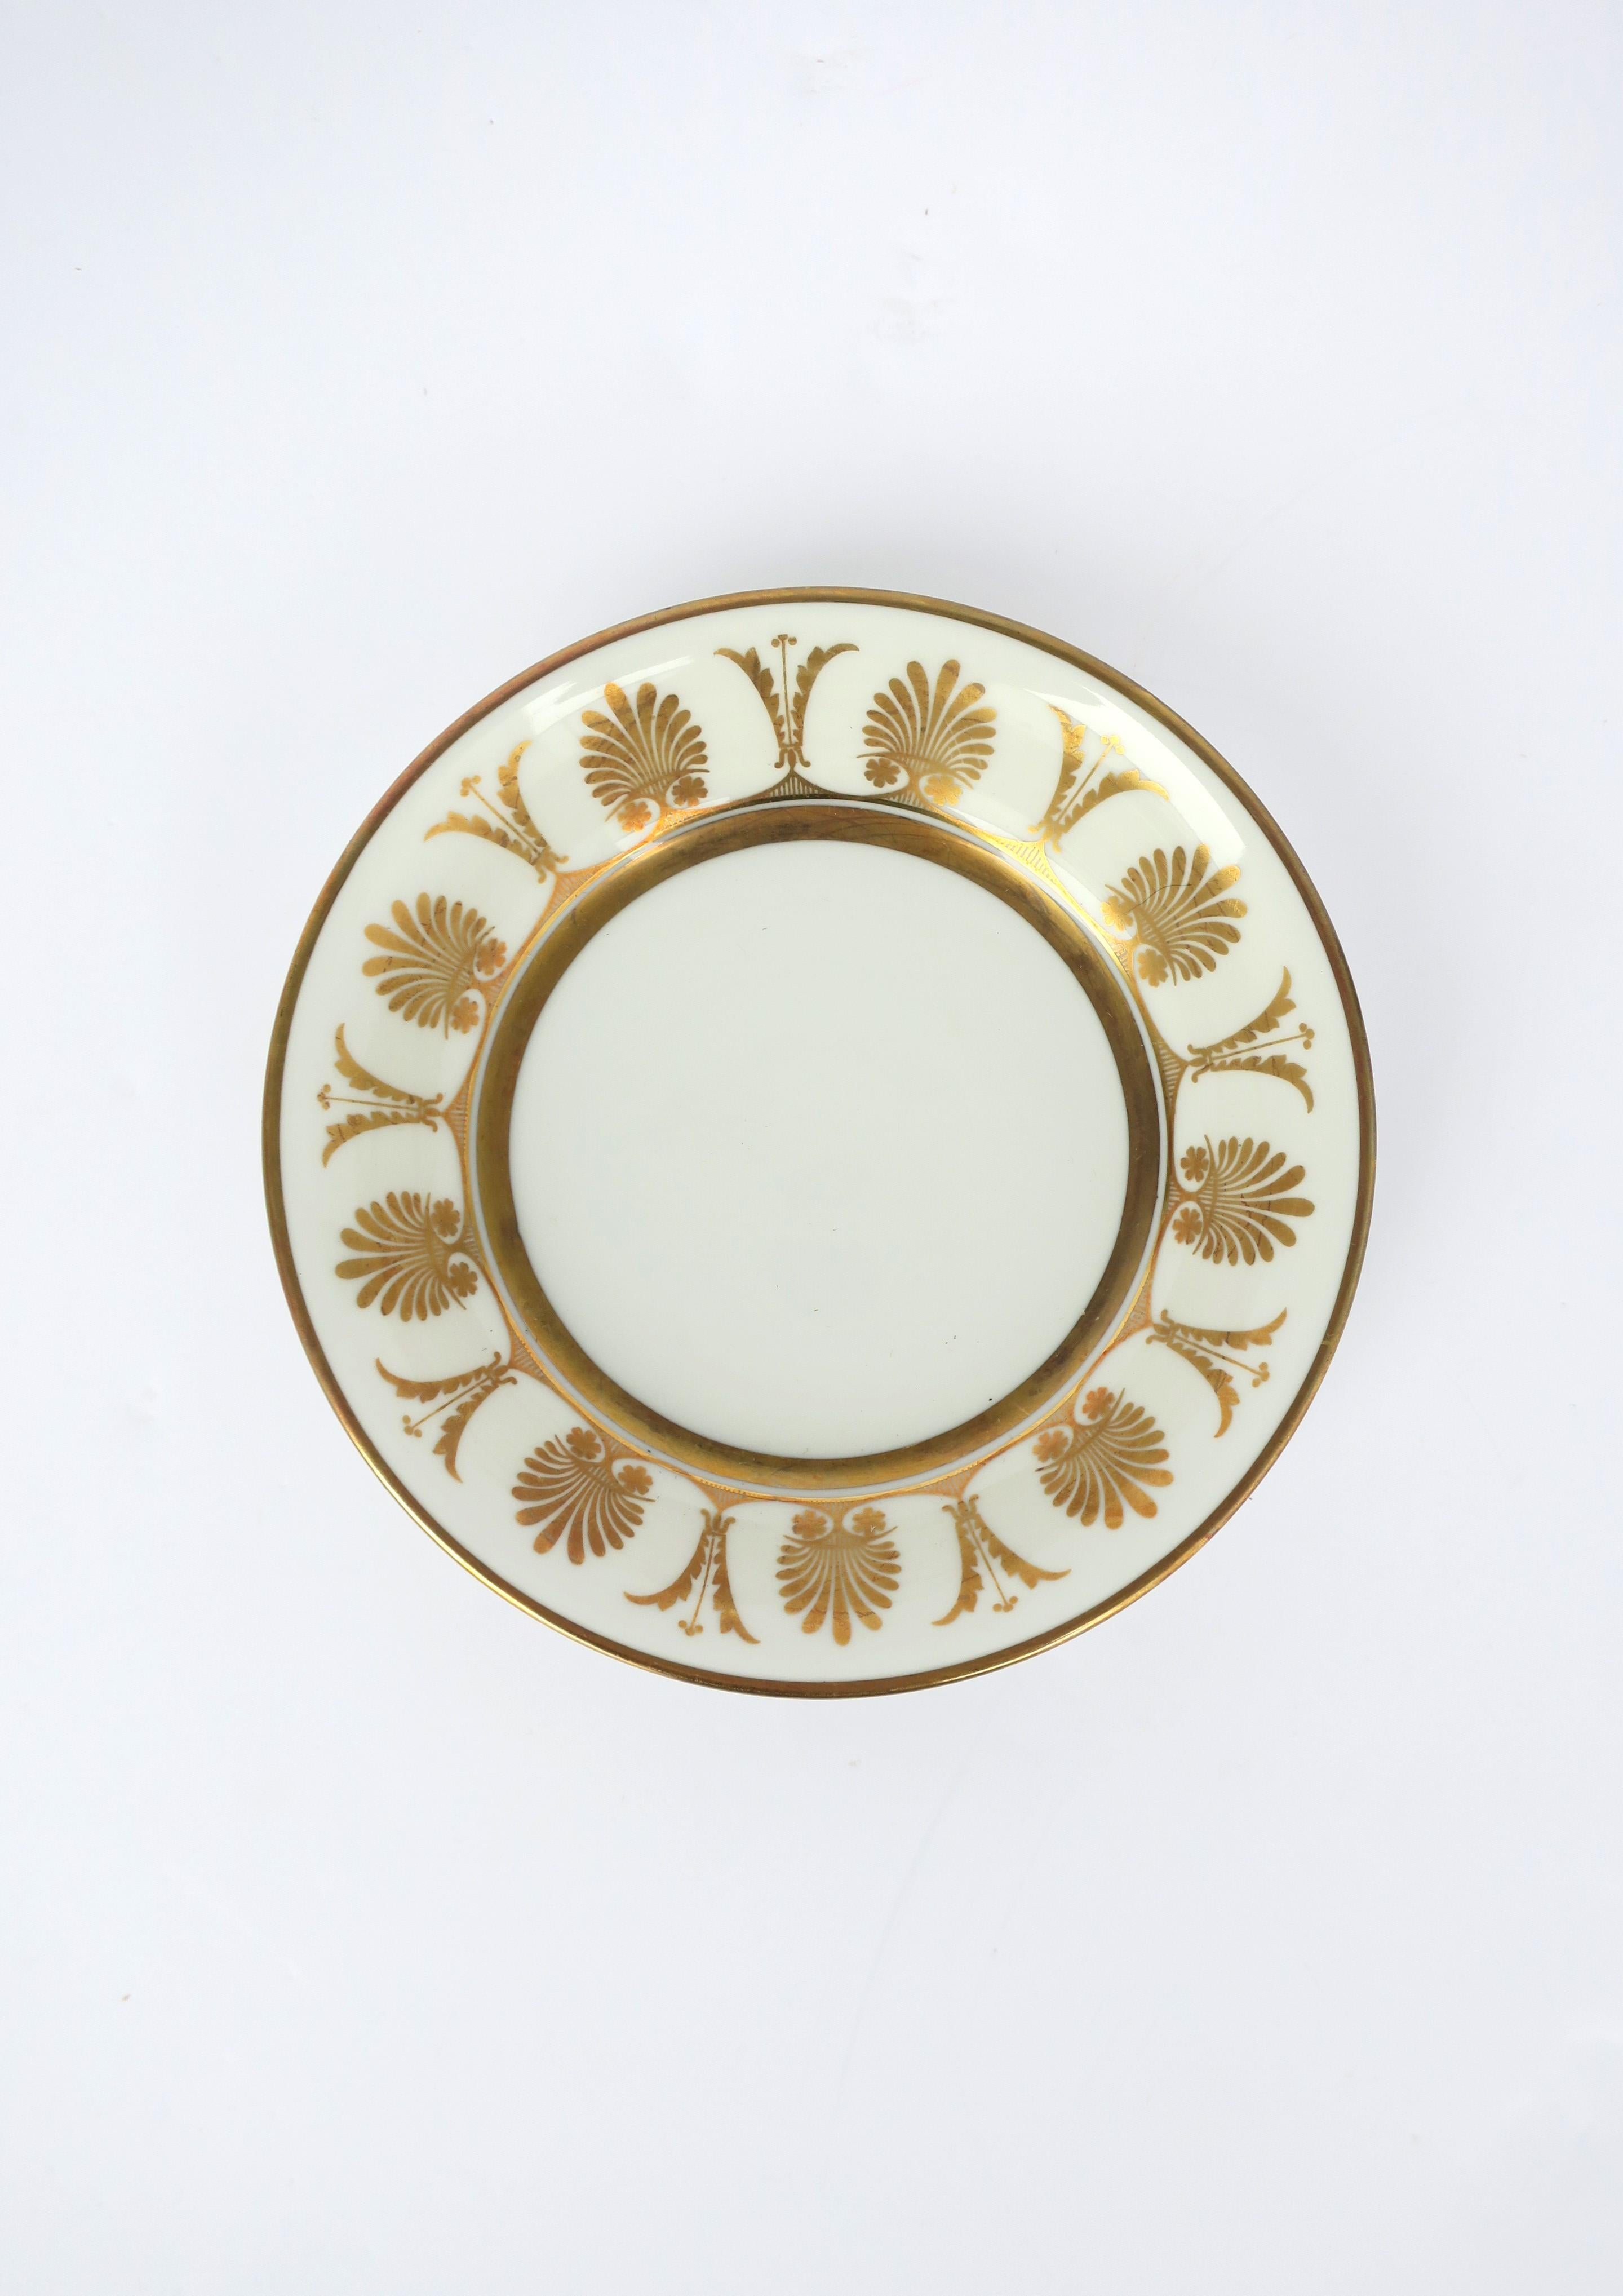 A vintage Italian white porcelain dish or bowl with gold detail by designer Richard Ginori, circa mid-20th century, 1960s, Italy. Dish was probably part of a larger set; however, I'm showing it as jewelry dish (demonstrated.) Bowl/dish may also hold